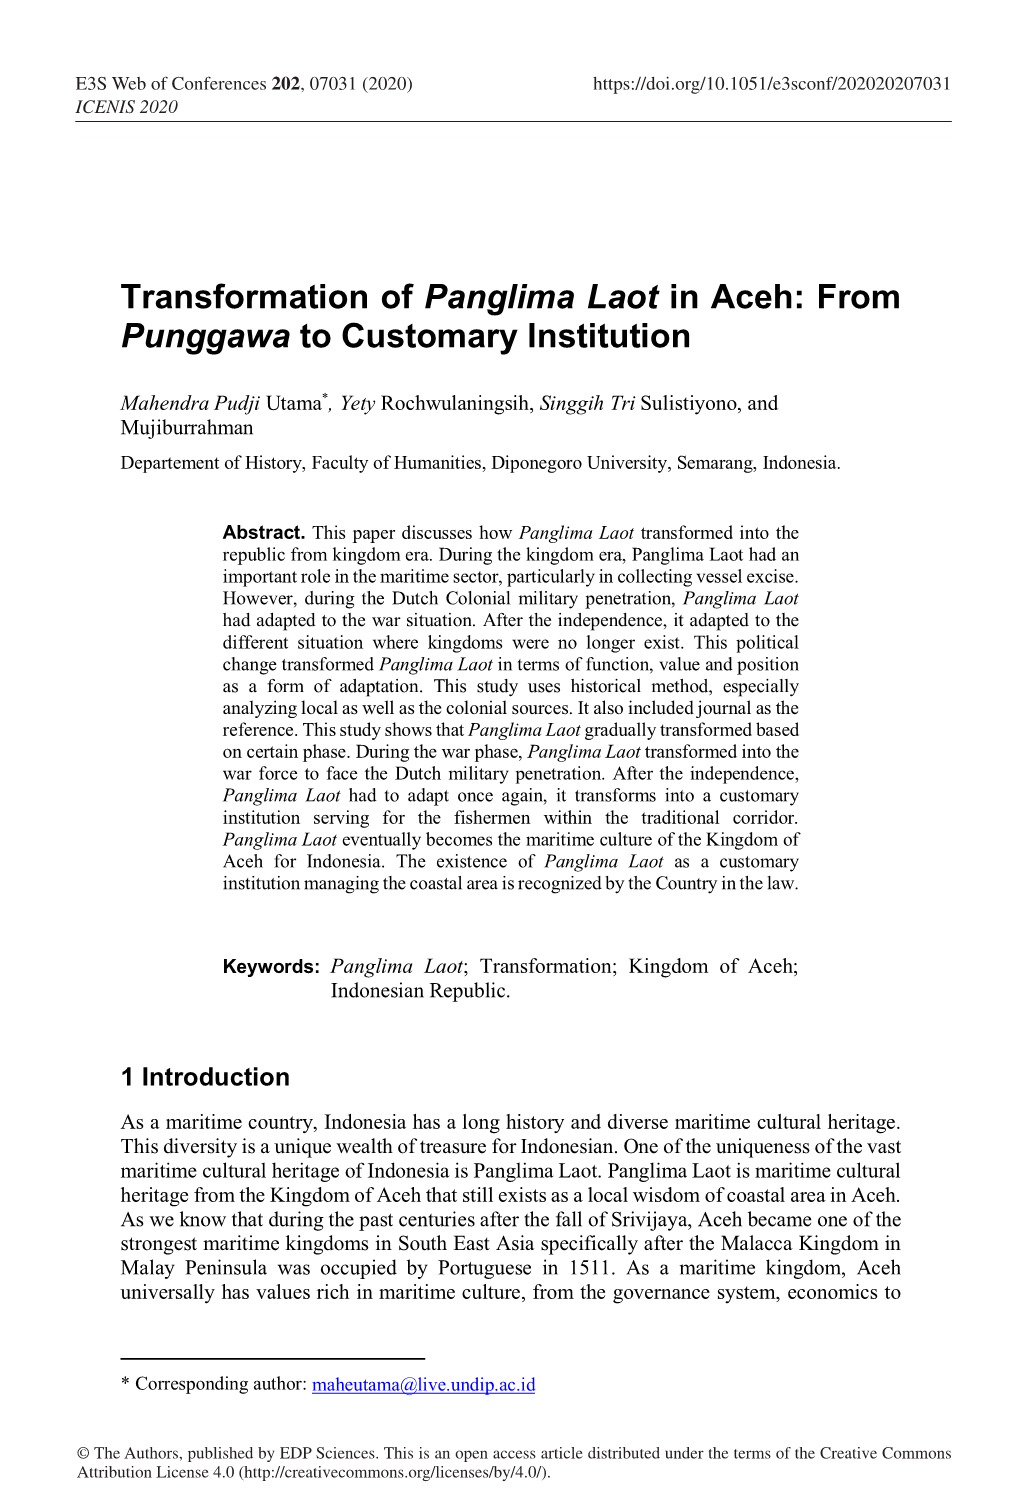 Transformation of Panglima Laot in Aceh: from Punggawa to Customary Institution